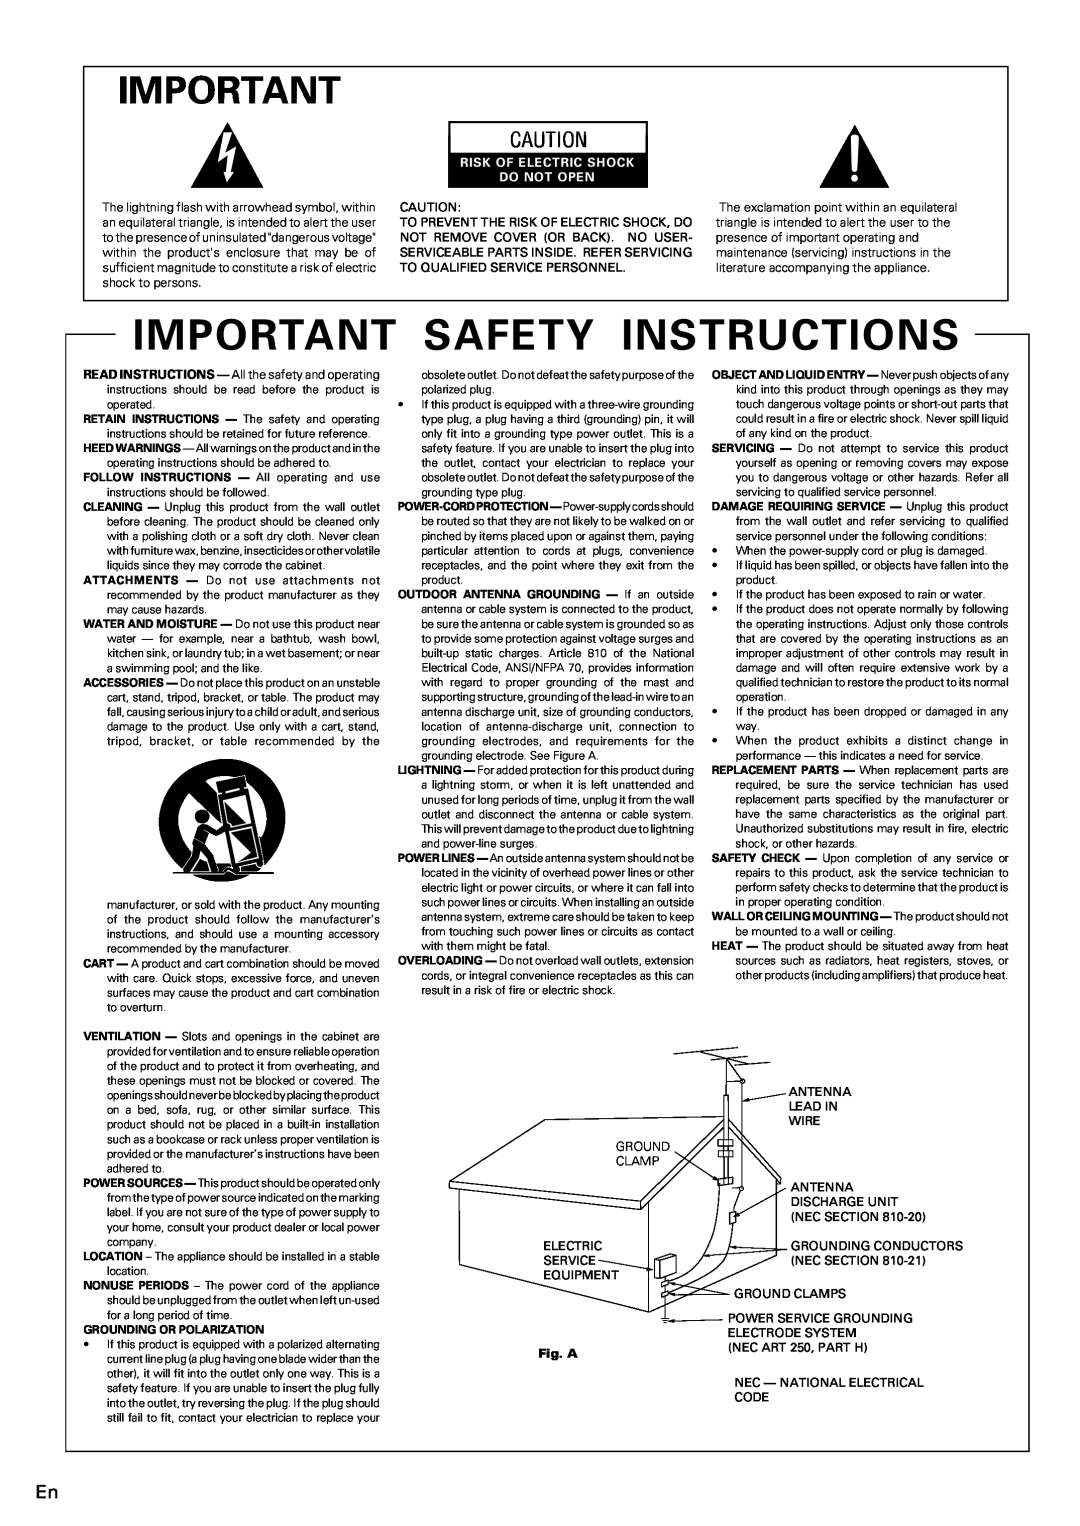 Pioneer PDR-W839 manual Important Safety Instructions, Risk Of Electric Shock Do Not Open, Fig. A 